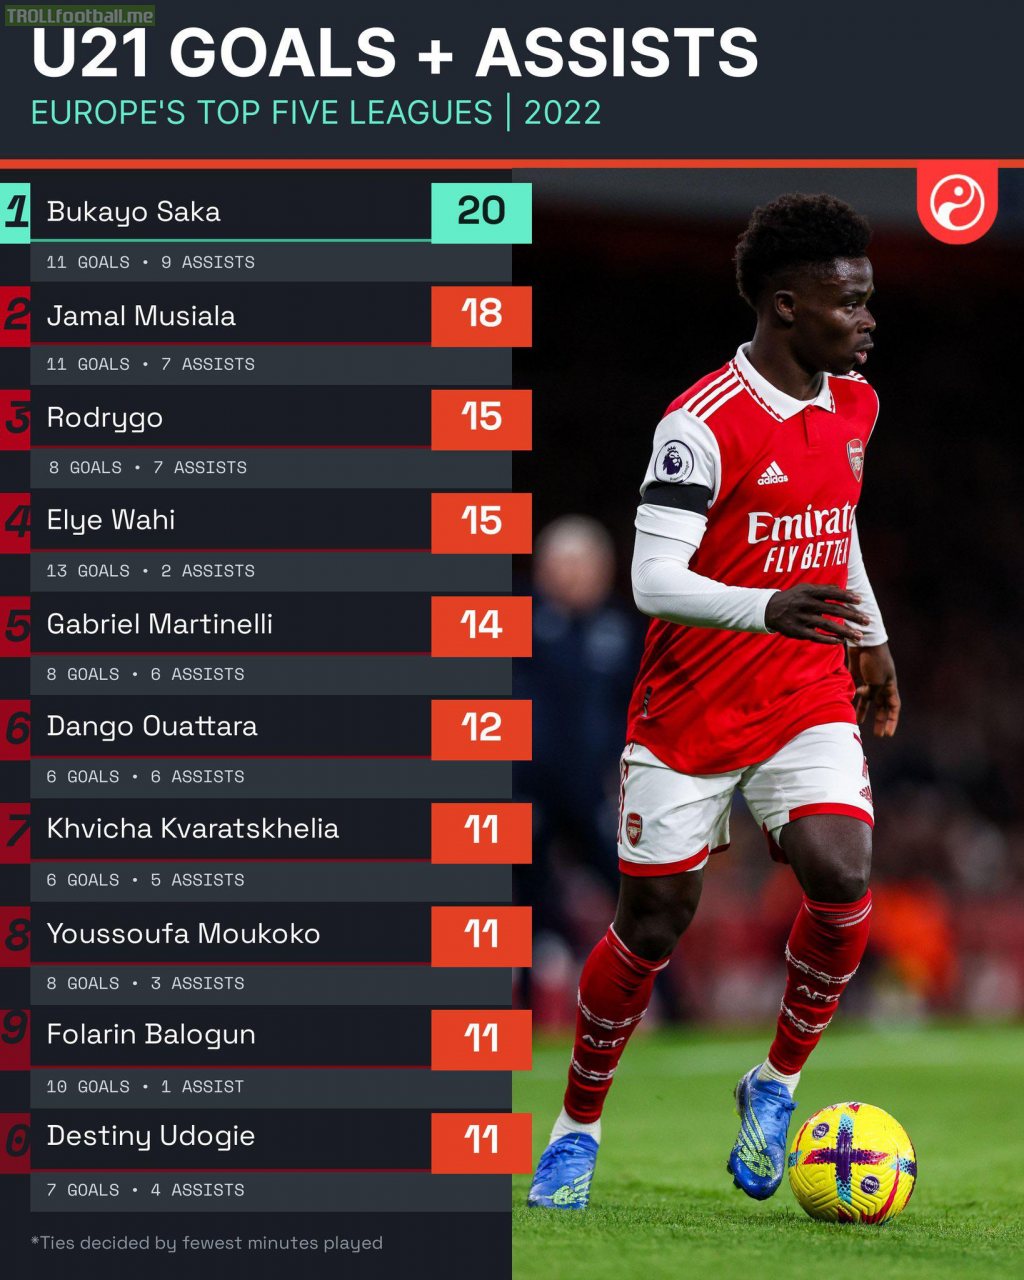 Squawka: Most goal involvements by under 21 players in Europe's top 5 leagues in 2022